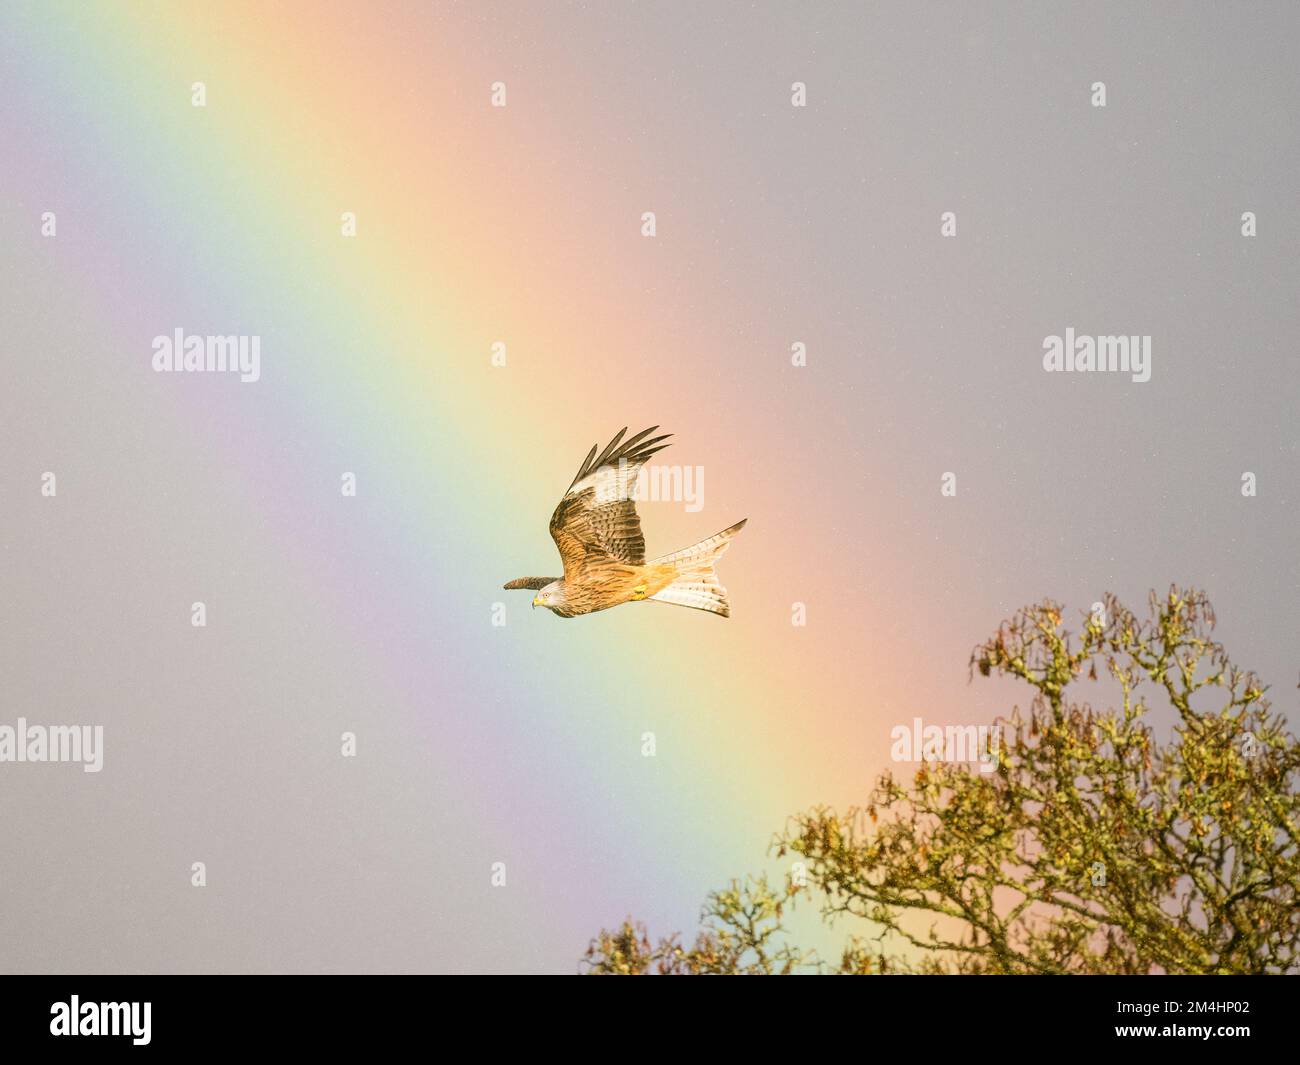 Aberystwyth, Ceredigion, Wales, UK. 21st Dec, 2022. On the shortest day a heavy downpour on a sunny day has made a vibrant rainbow. The red kites which are numerous in mid Wales are flying through the rainbow. Credit: Phil Jones/Alamy Live News Stock Photo